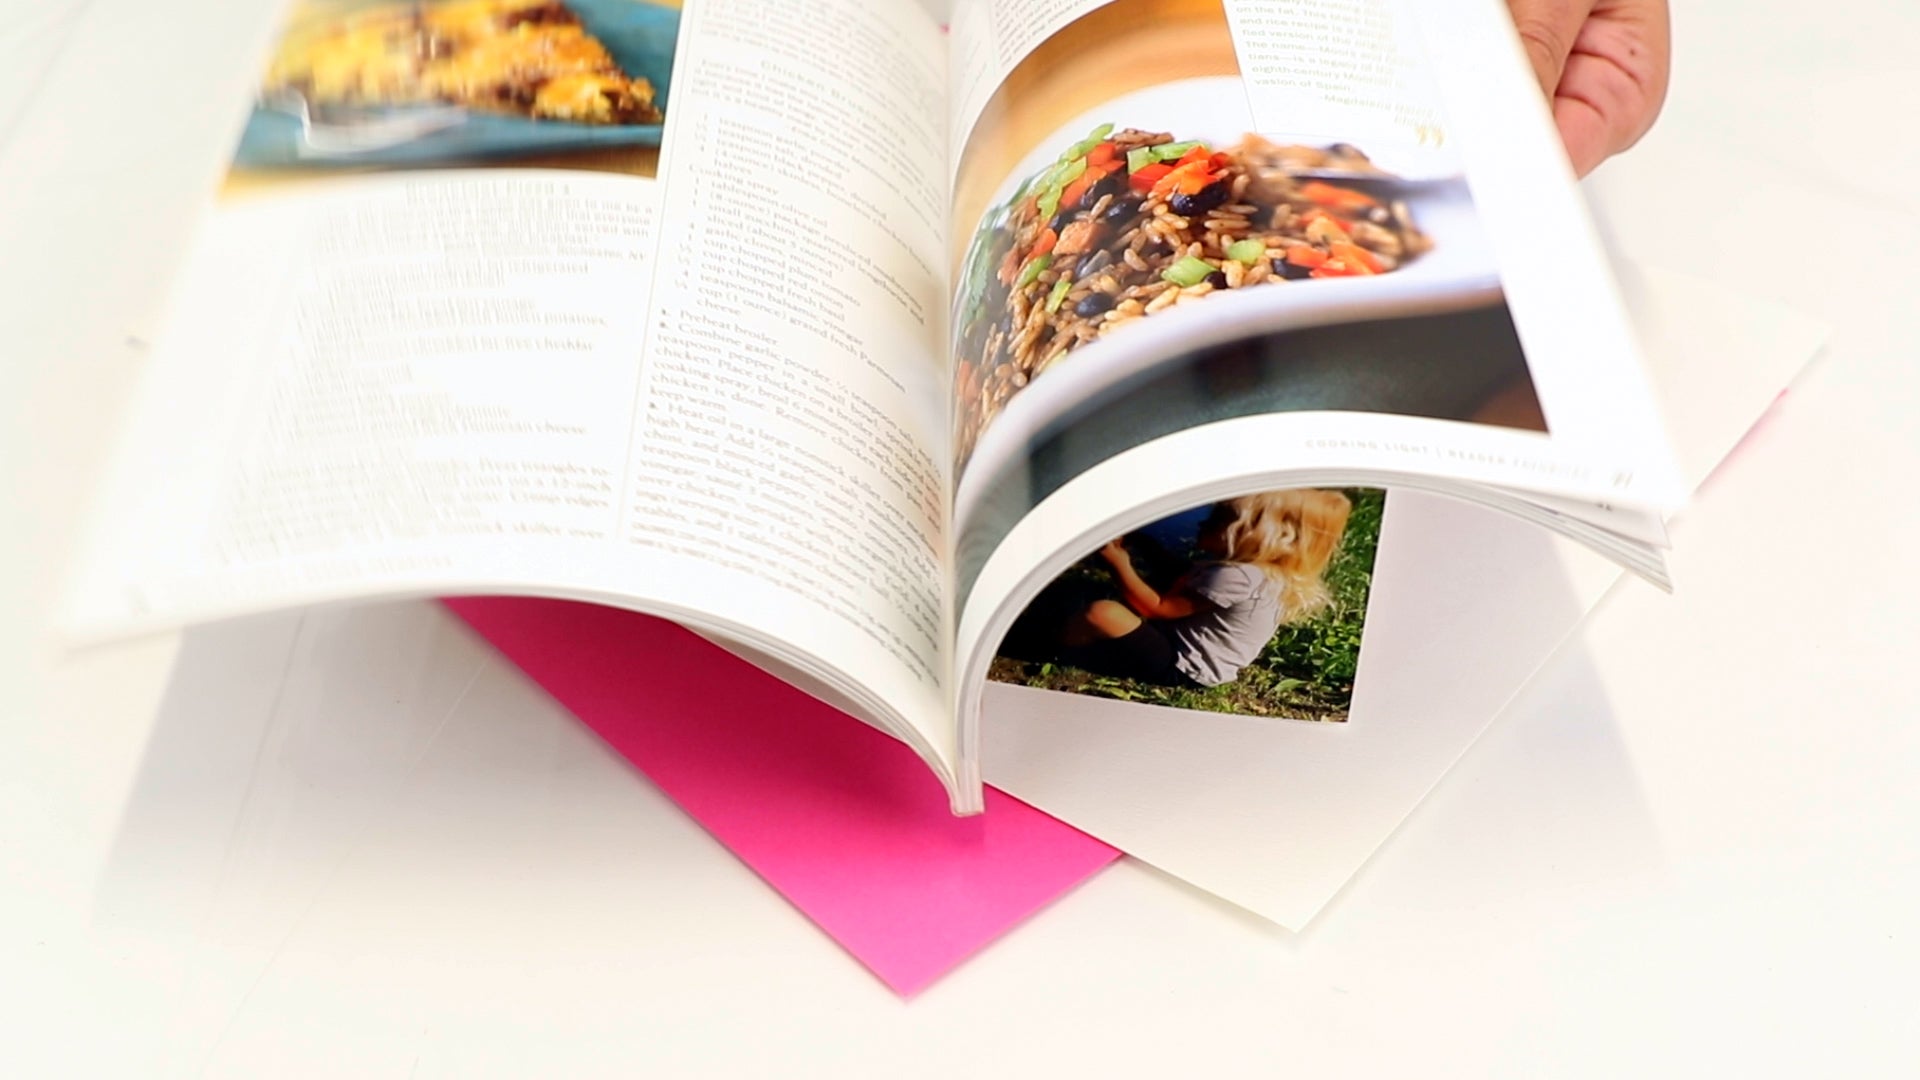 glossy, high quality, coated paper typically doesn't need to be sealed